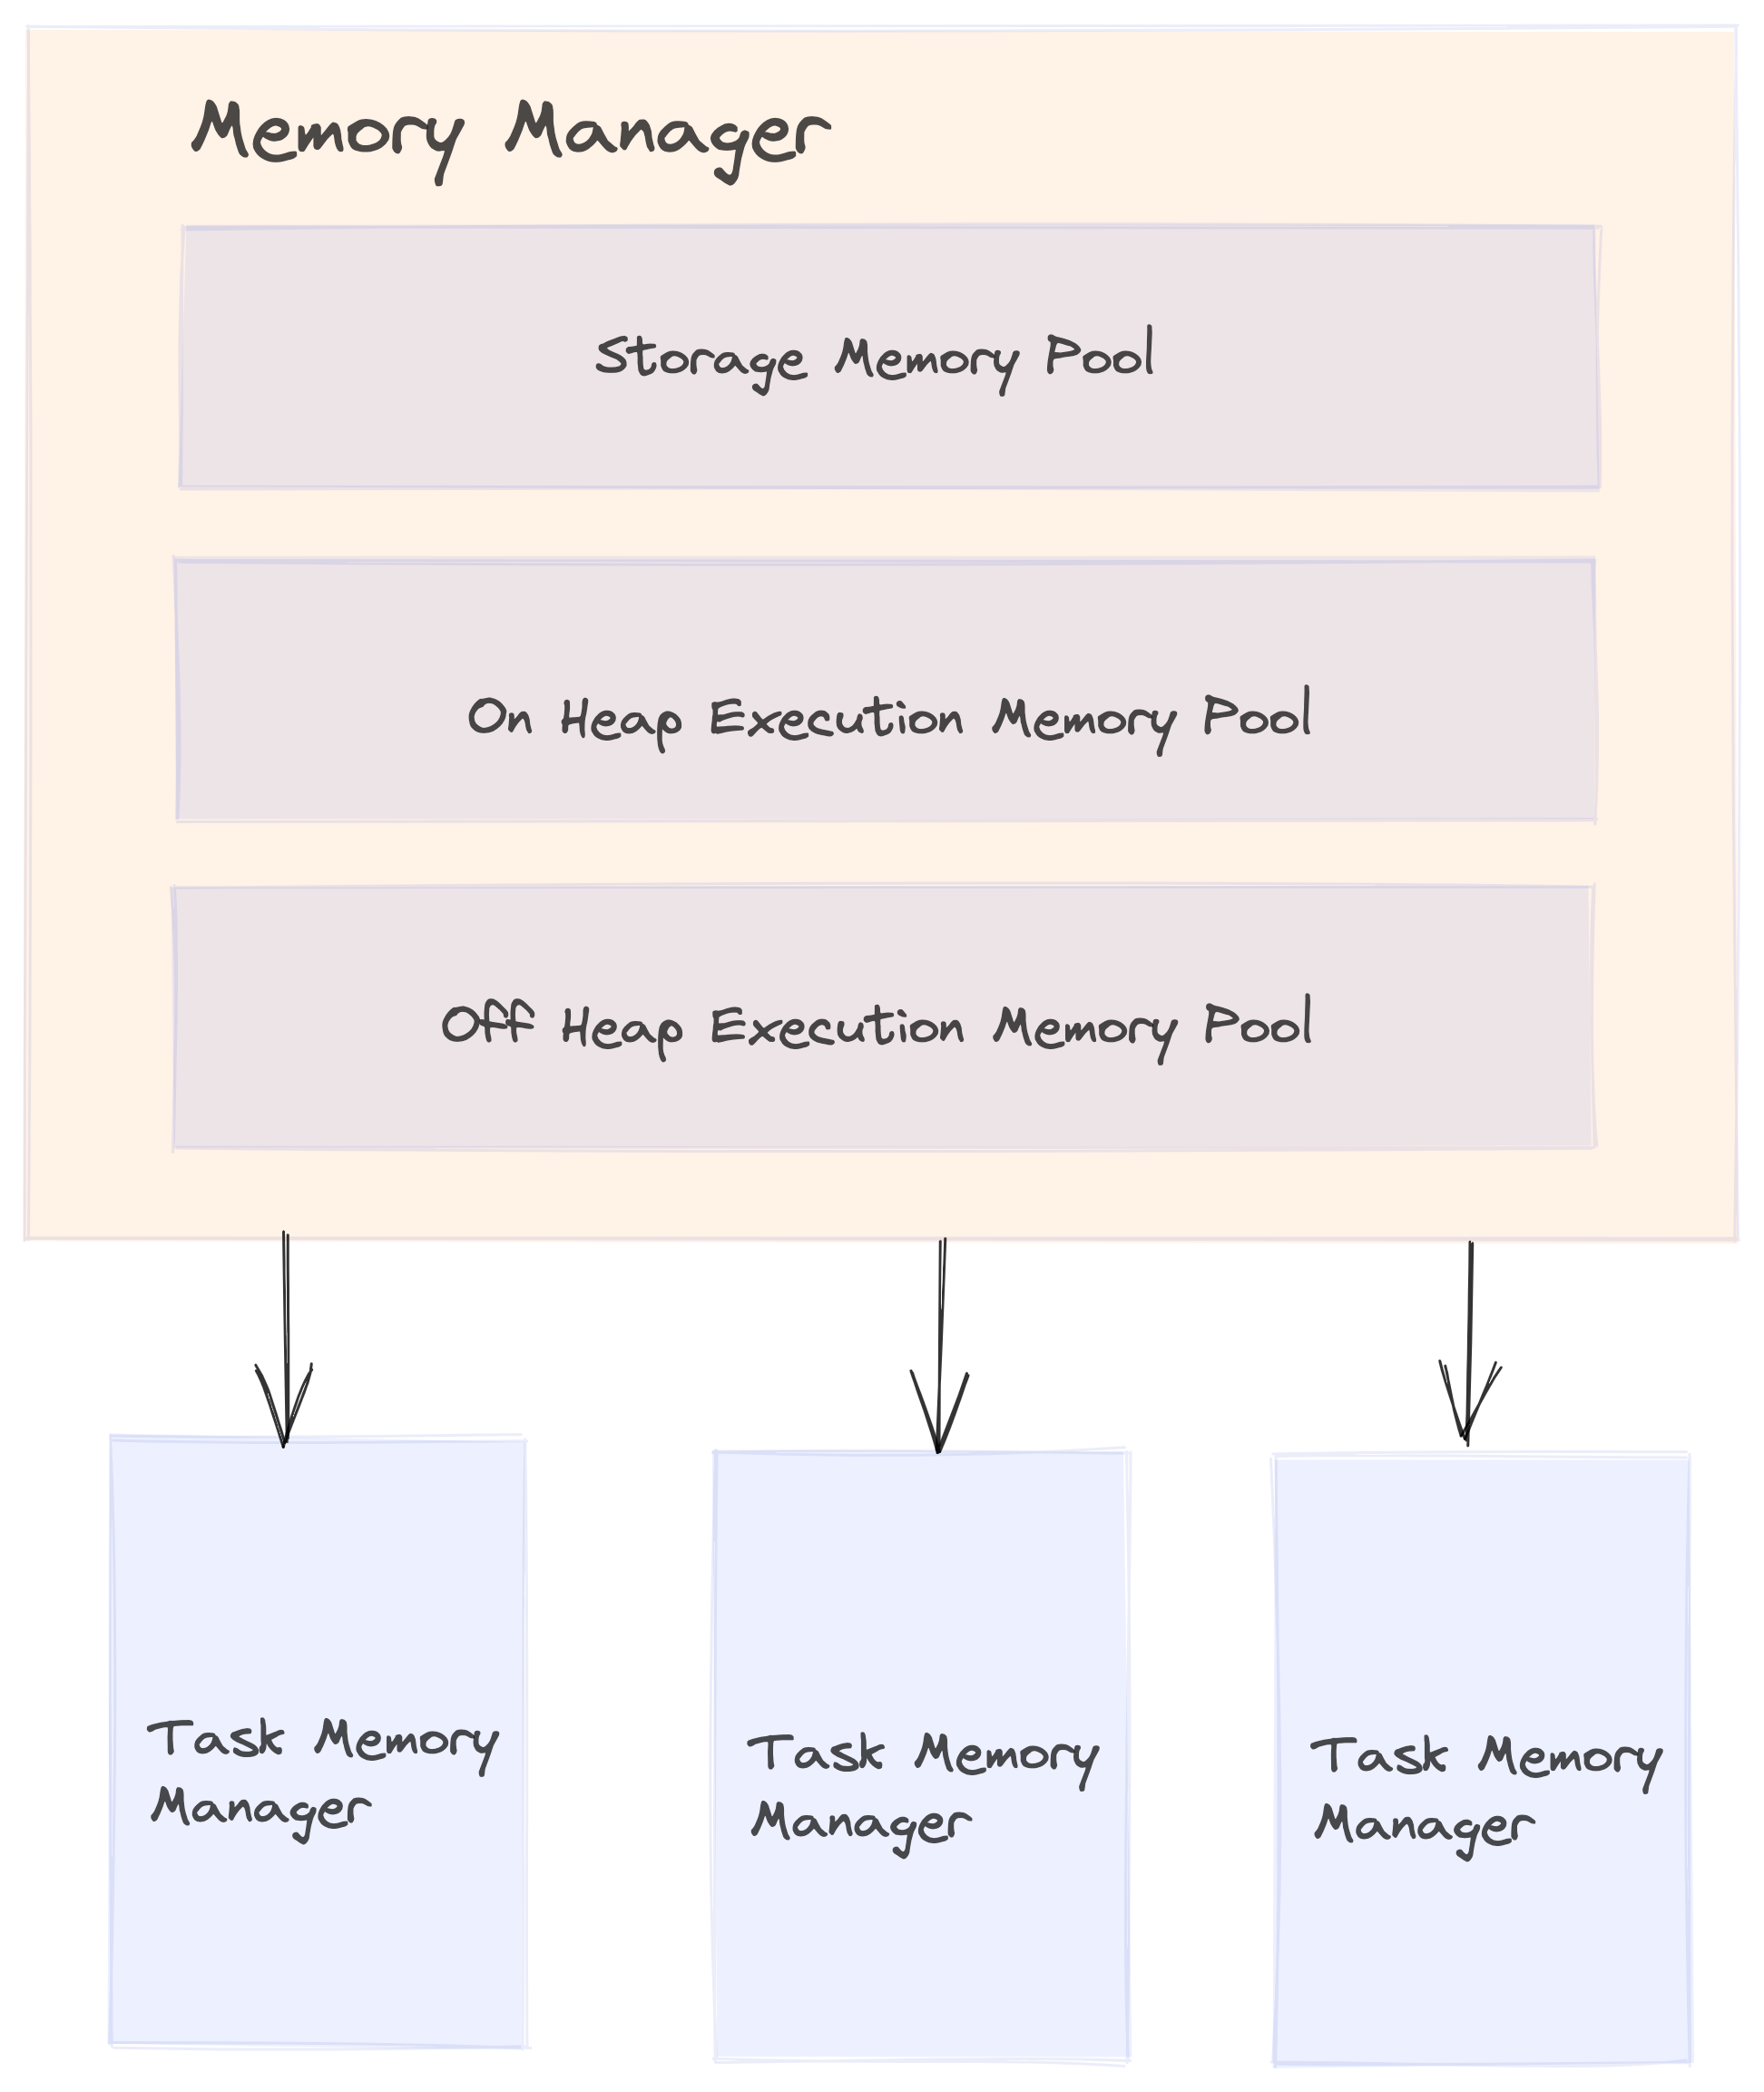 Memory Manager Image